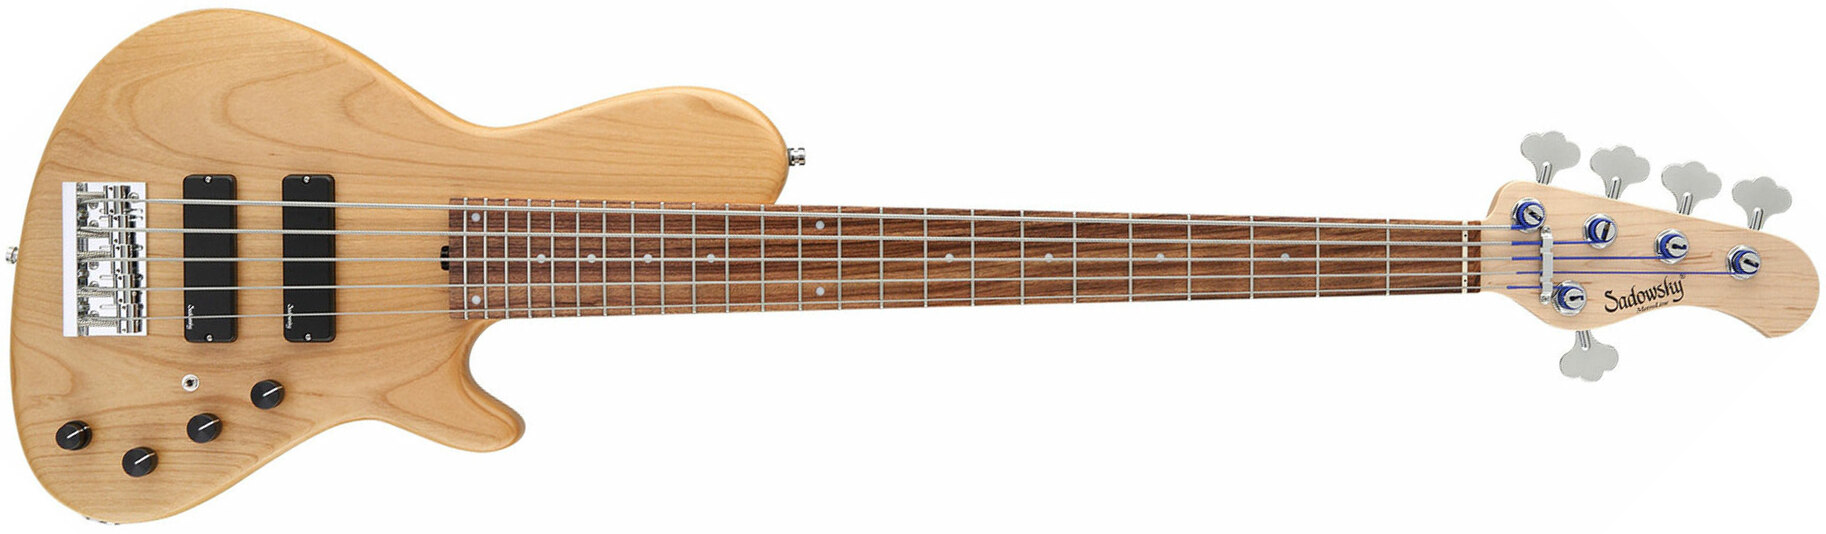 Sadowsky Single Cut Bass 24f Alder 5c Metroline All Active Pf - Natural Satin - Solid body electric bass - Main picture